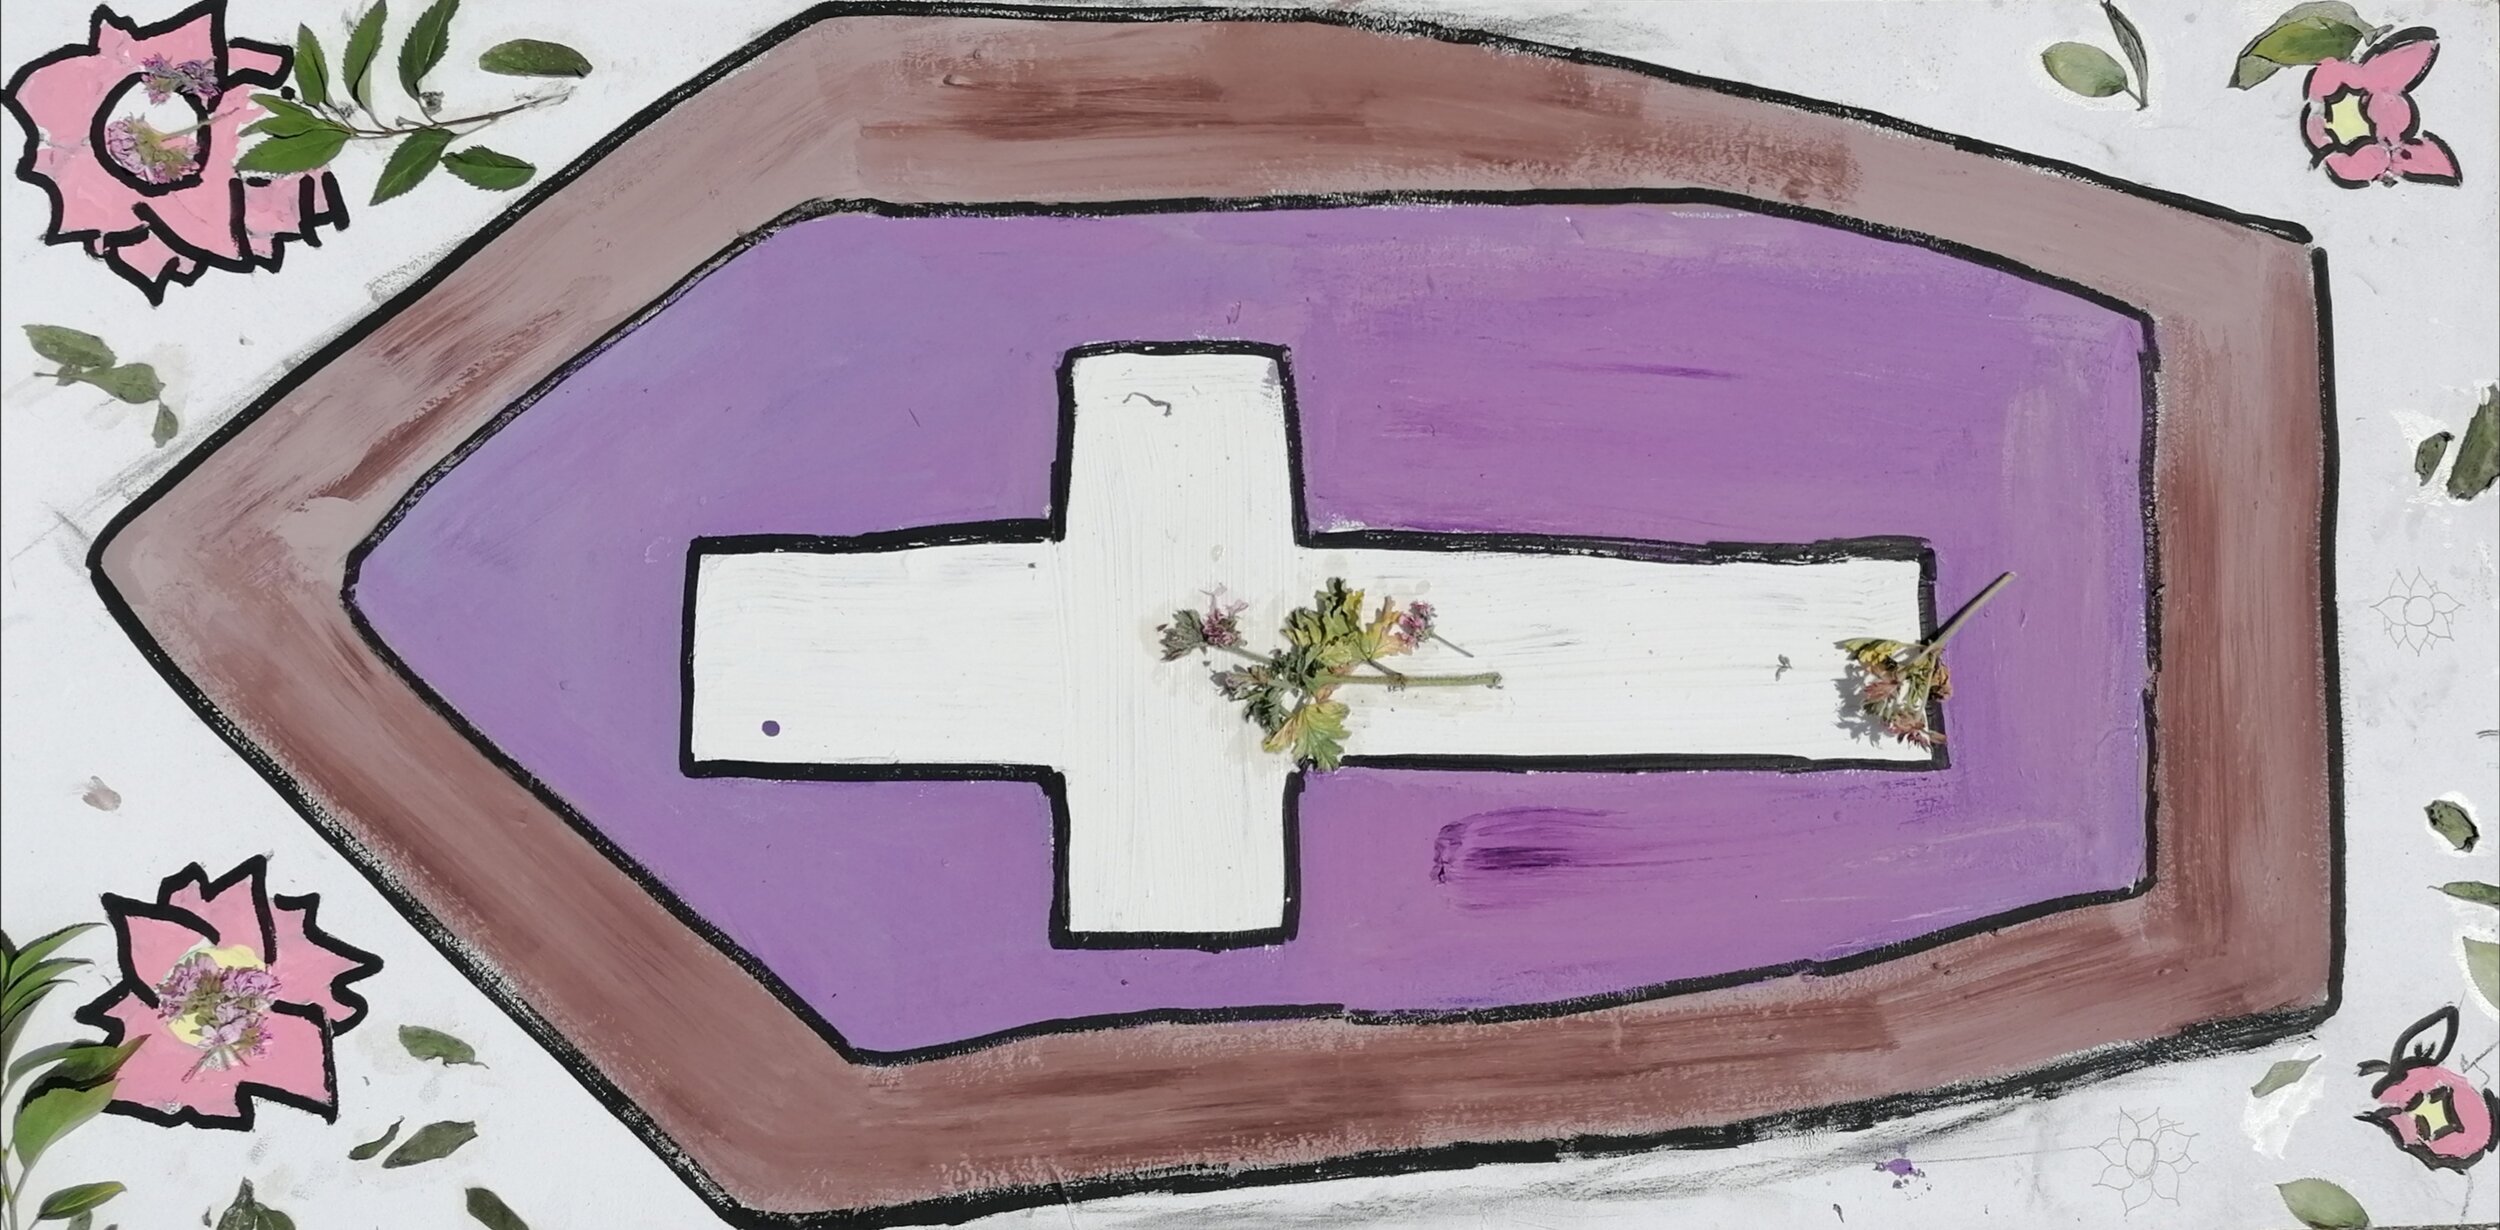 COFFIN WITH FLOWERS.